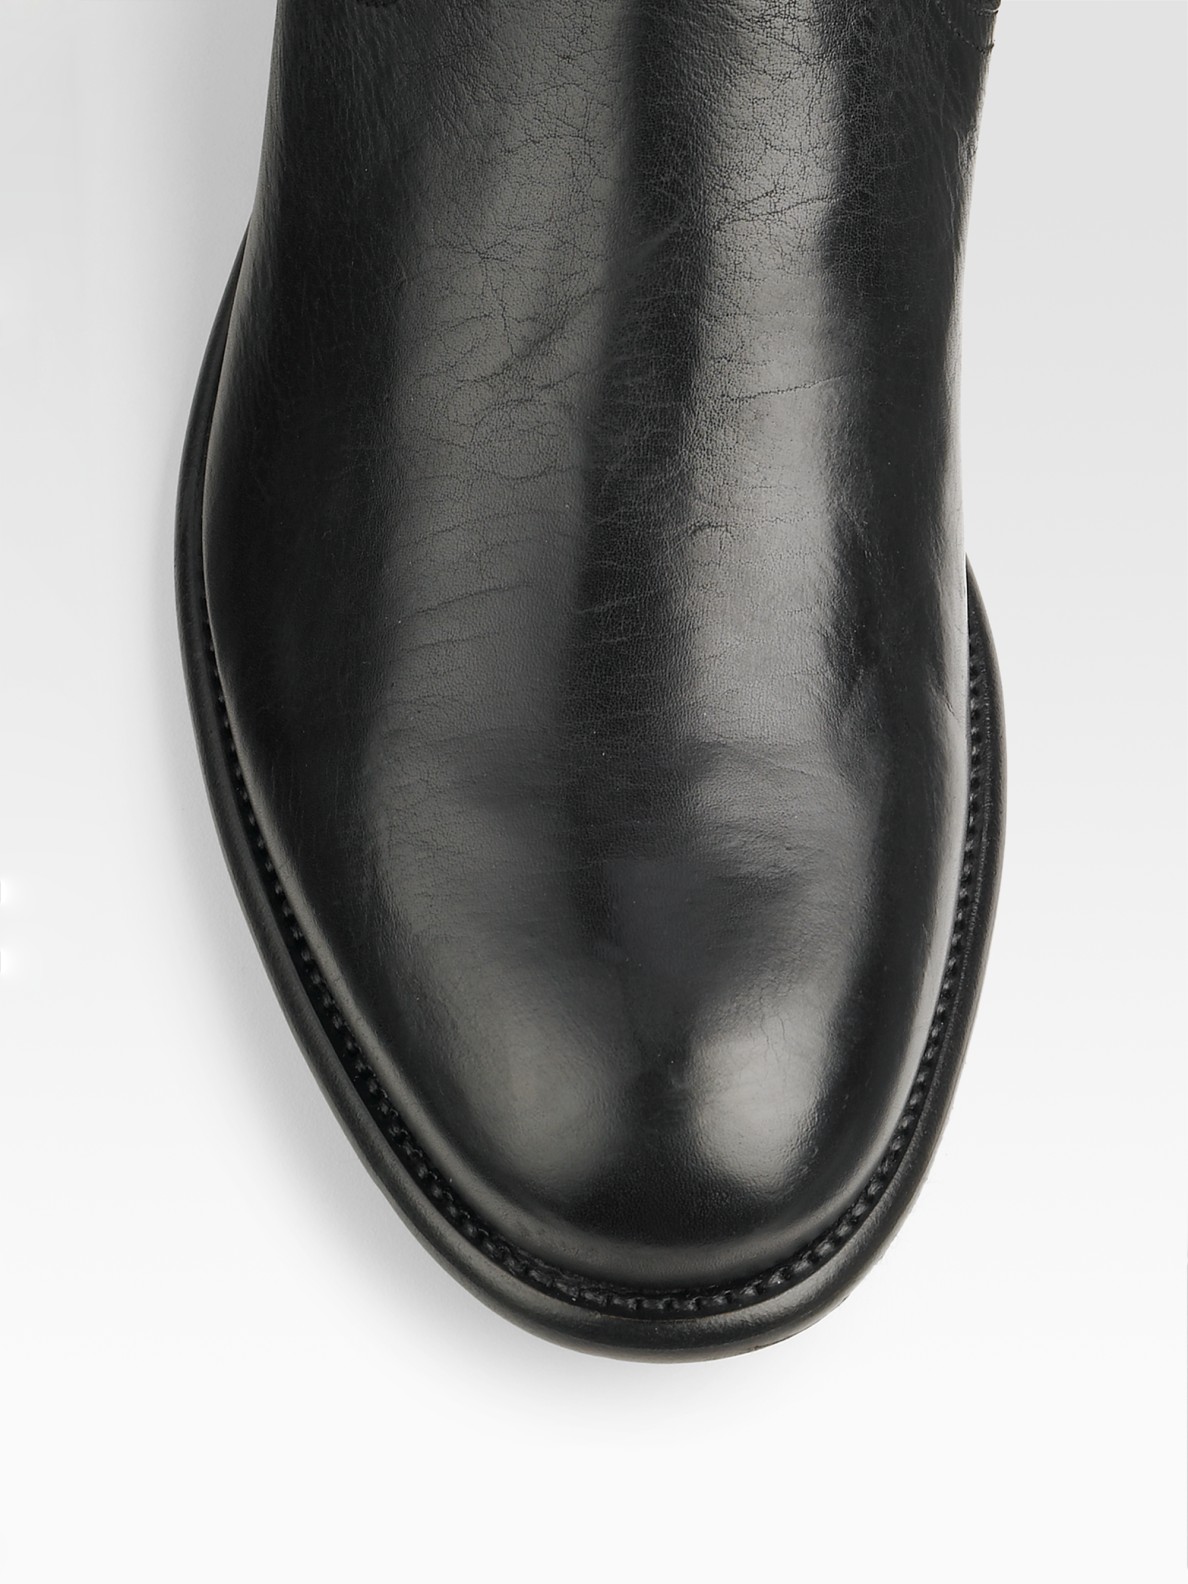 Paul Smith Pinkerton Leather Boots in Black for Men - Lyst